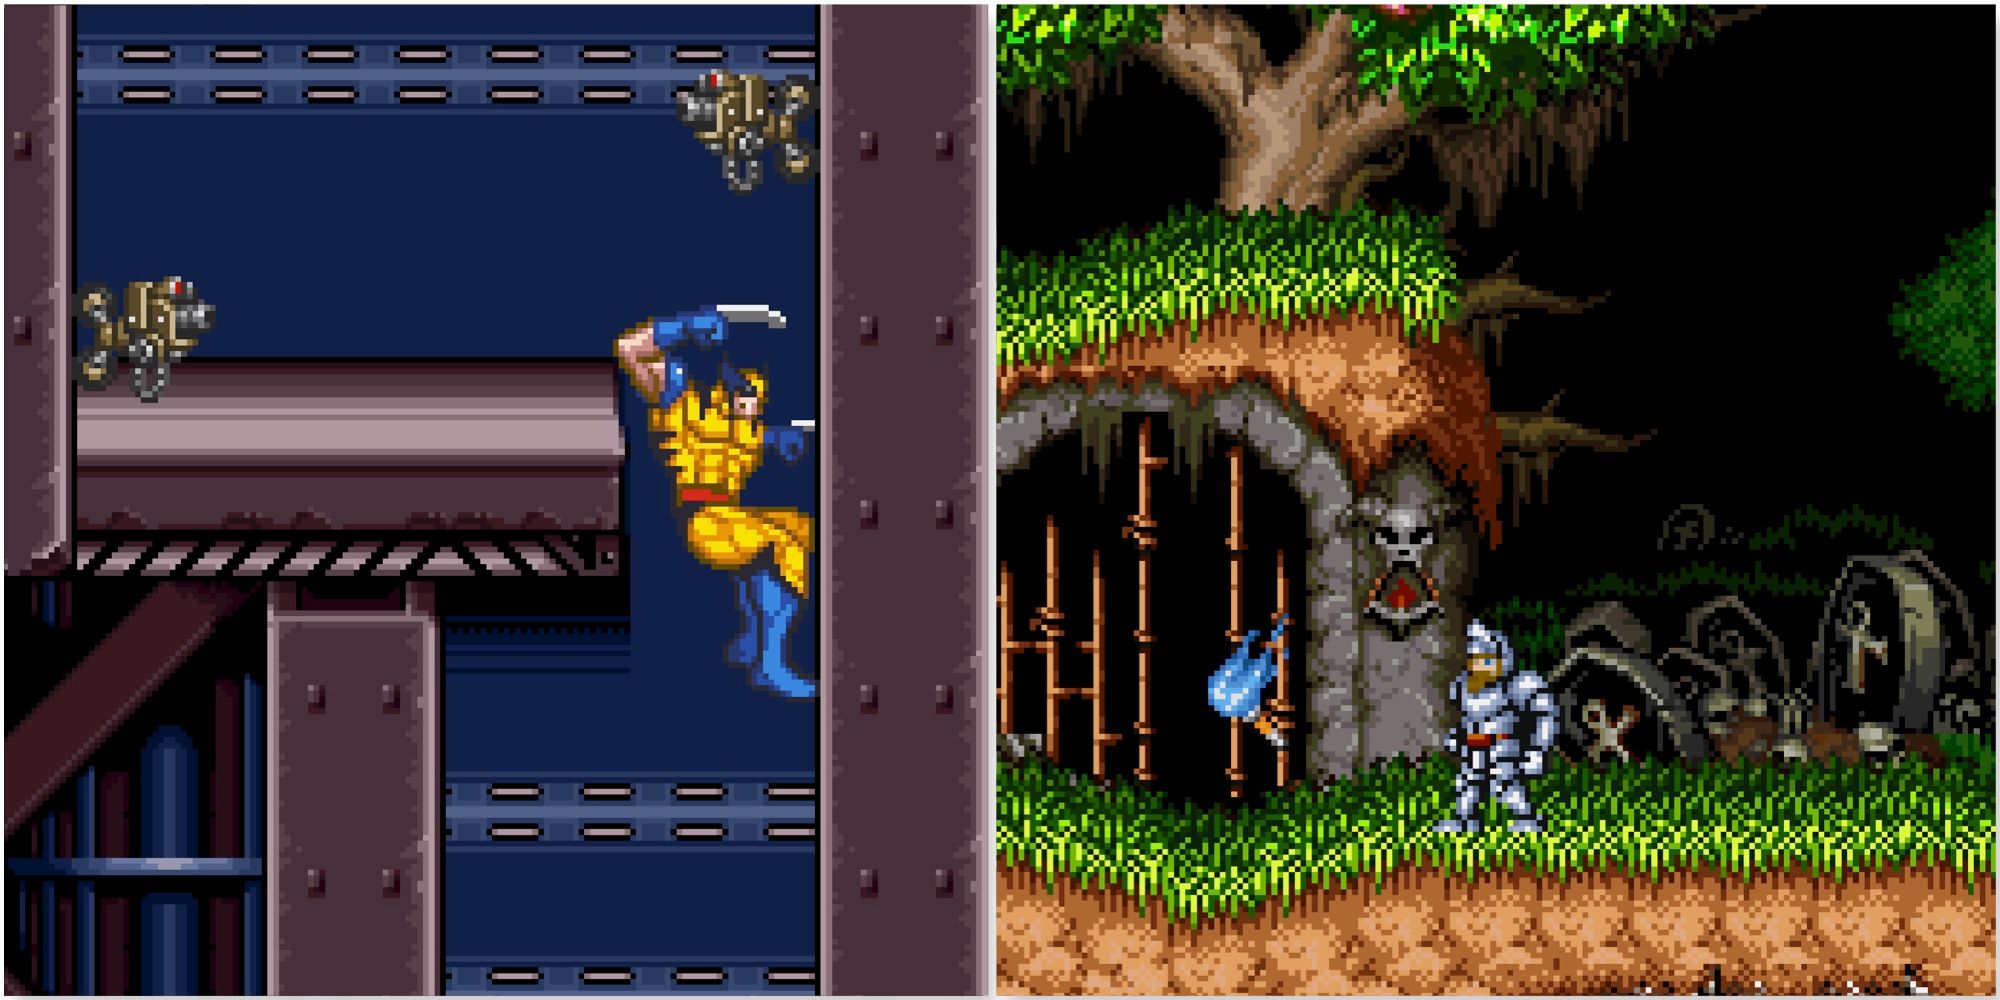 Climbing a wall in X-Men Mutant Apocalypse and Fighting enemies in Super Ghouls 'n Ghosts